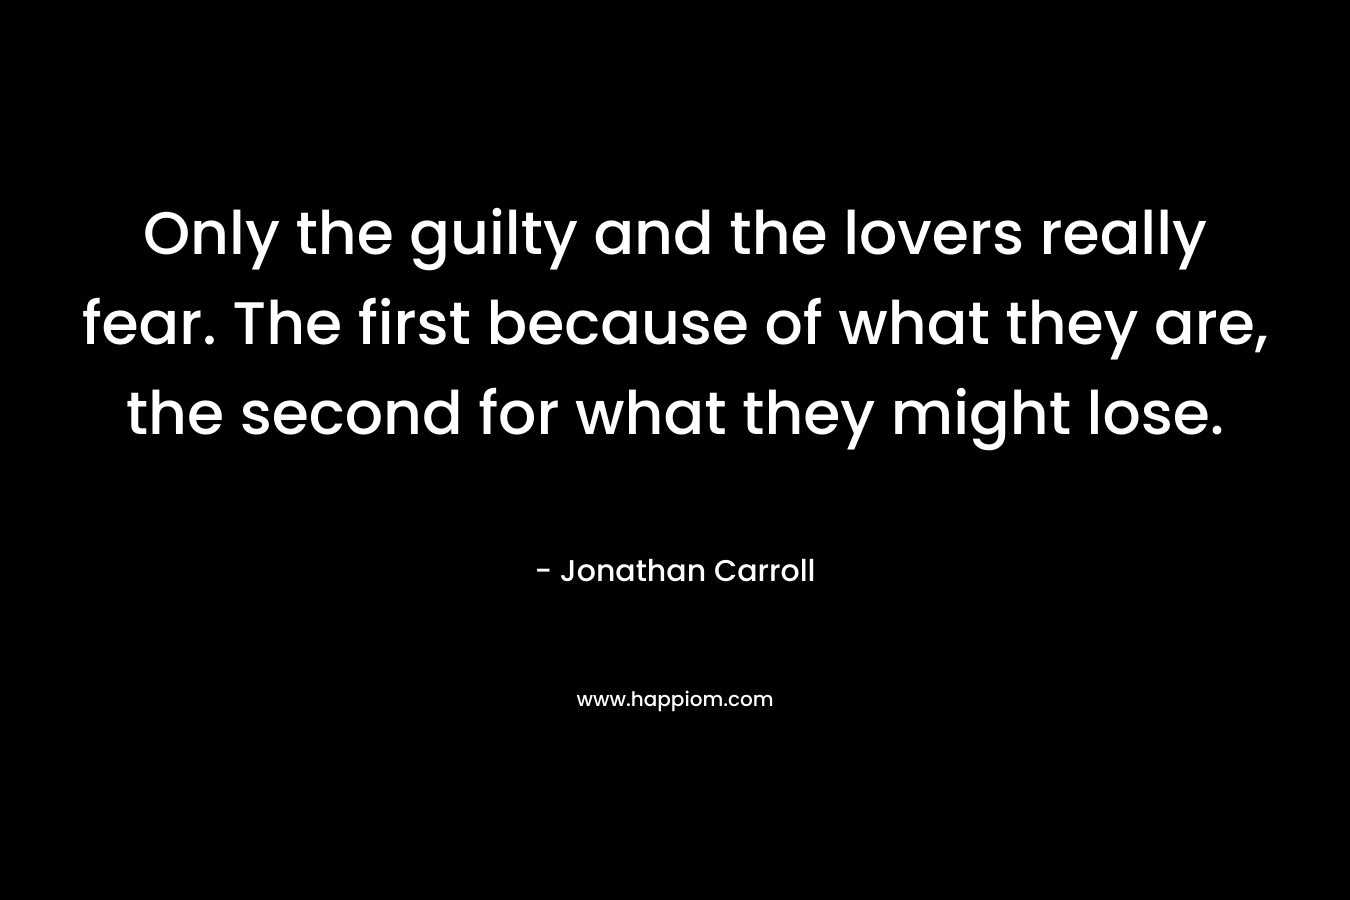 Only the guilty and the lovers really fear. The first because of what they are, the second for what they might lose. – Jonathan Carroll